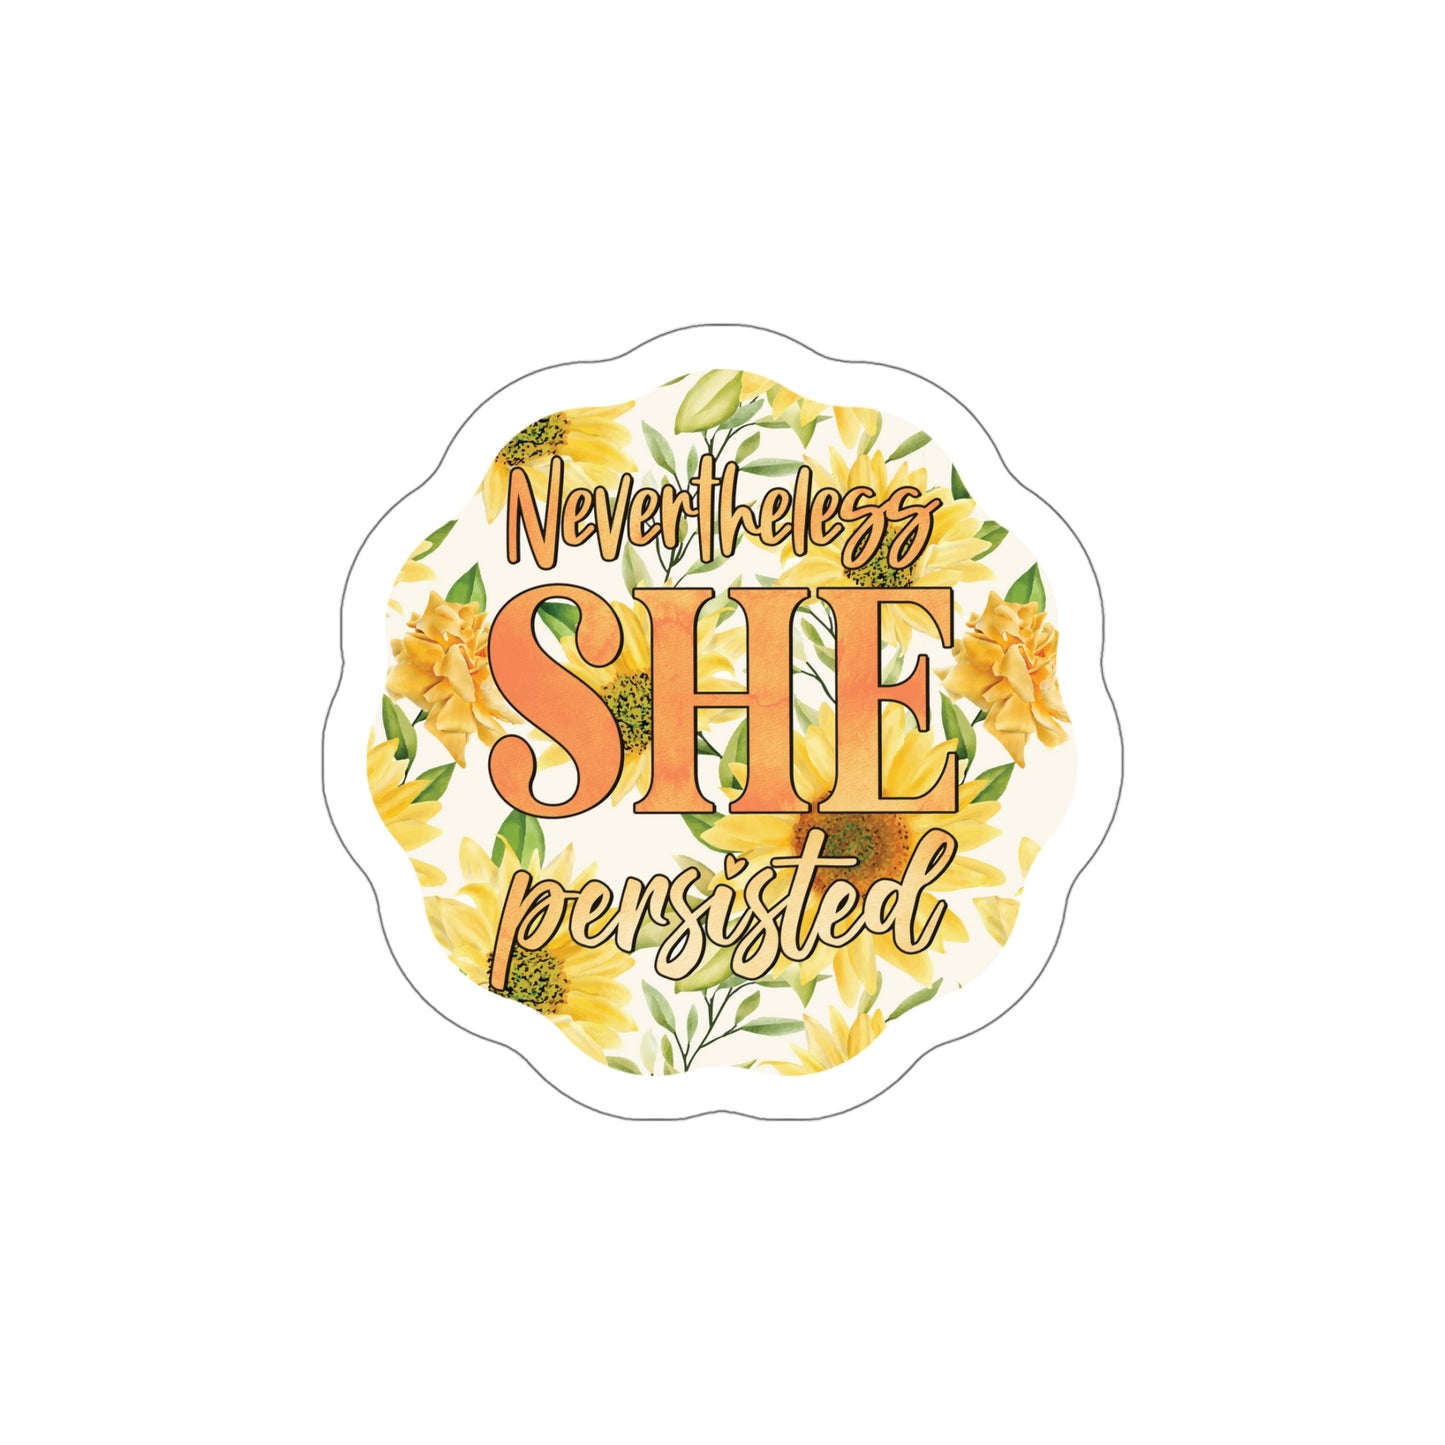 Nevertheless She Persisted Sticker Bright Colors | Fun Stickers | Happy Stickers | Must Have Stickers | Laptop Stickers | Best Stickers